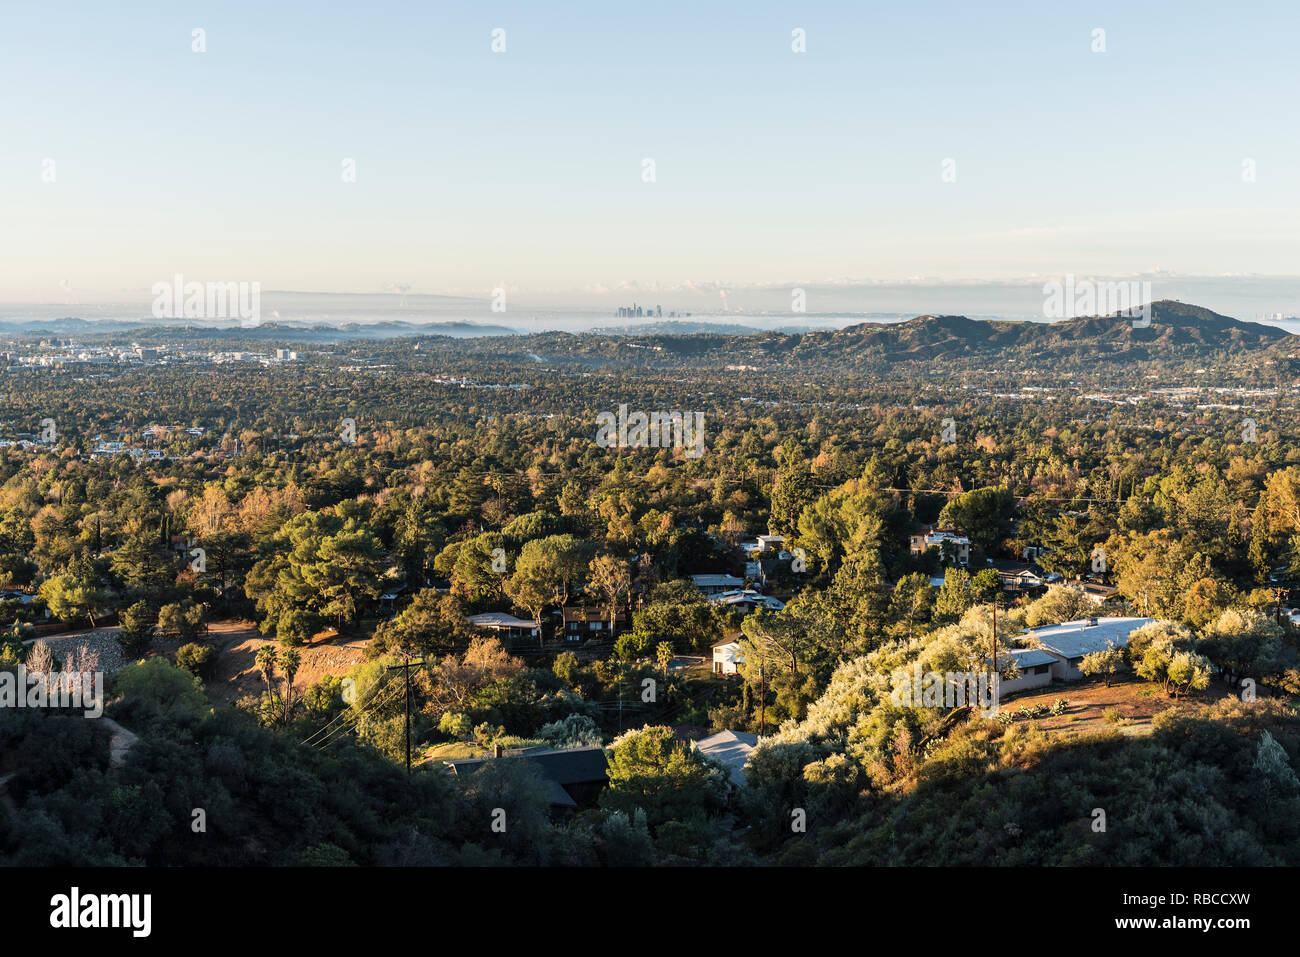 Morning view of Altadena, Pasadena and downtown Los Angeles from San Gabriel Mountains hilltop in Southern California. Stock Photo